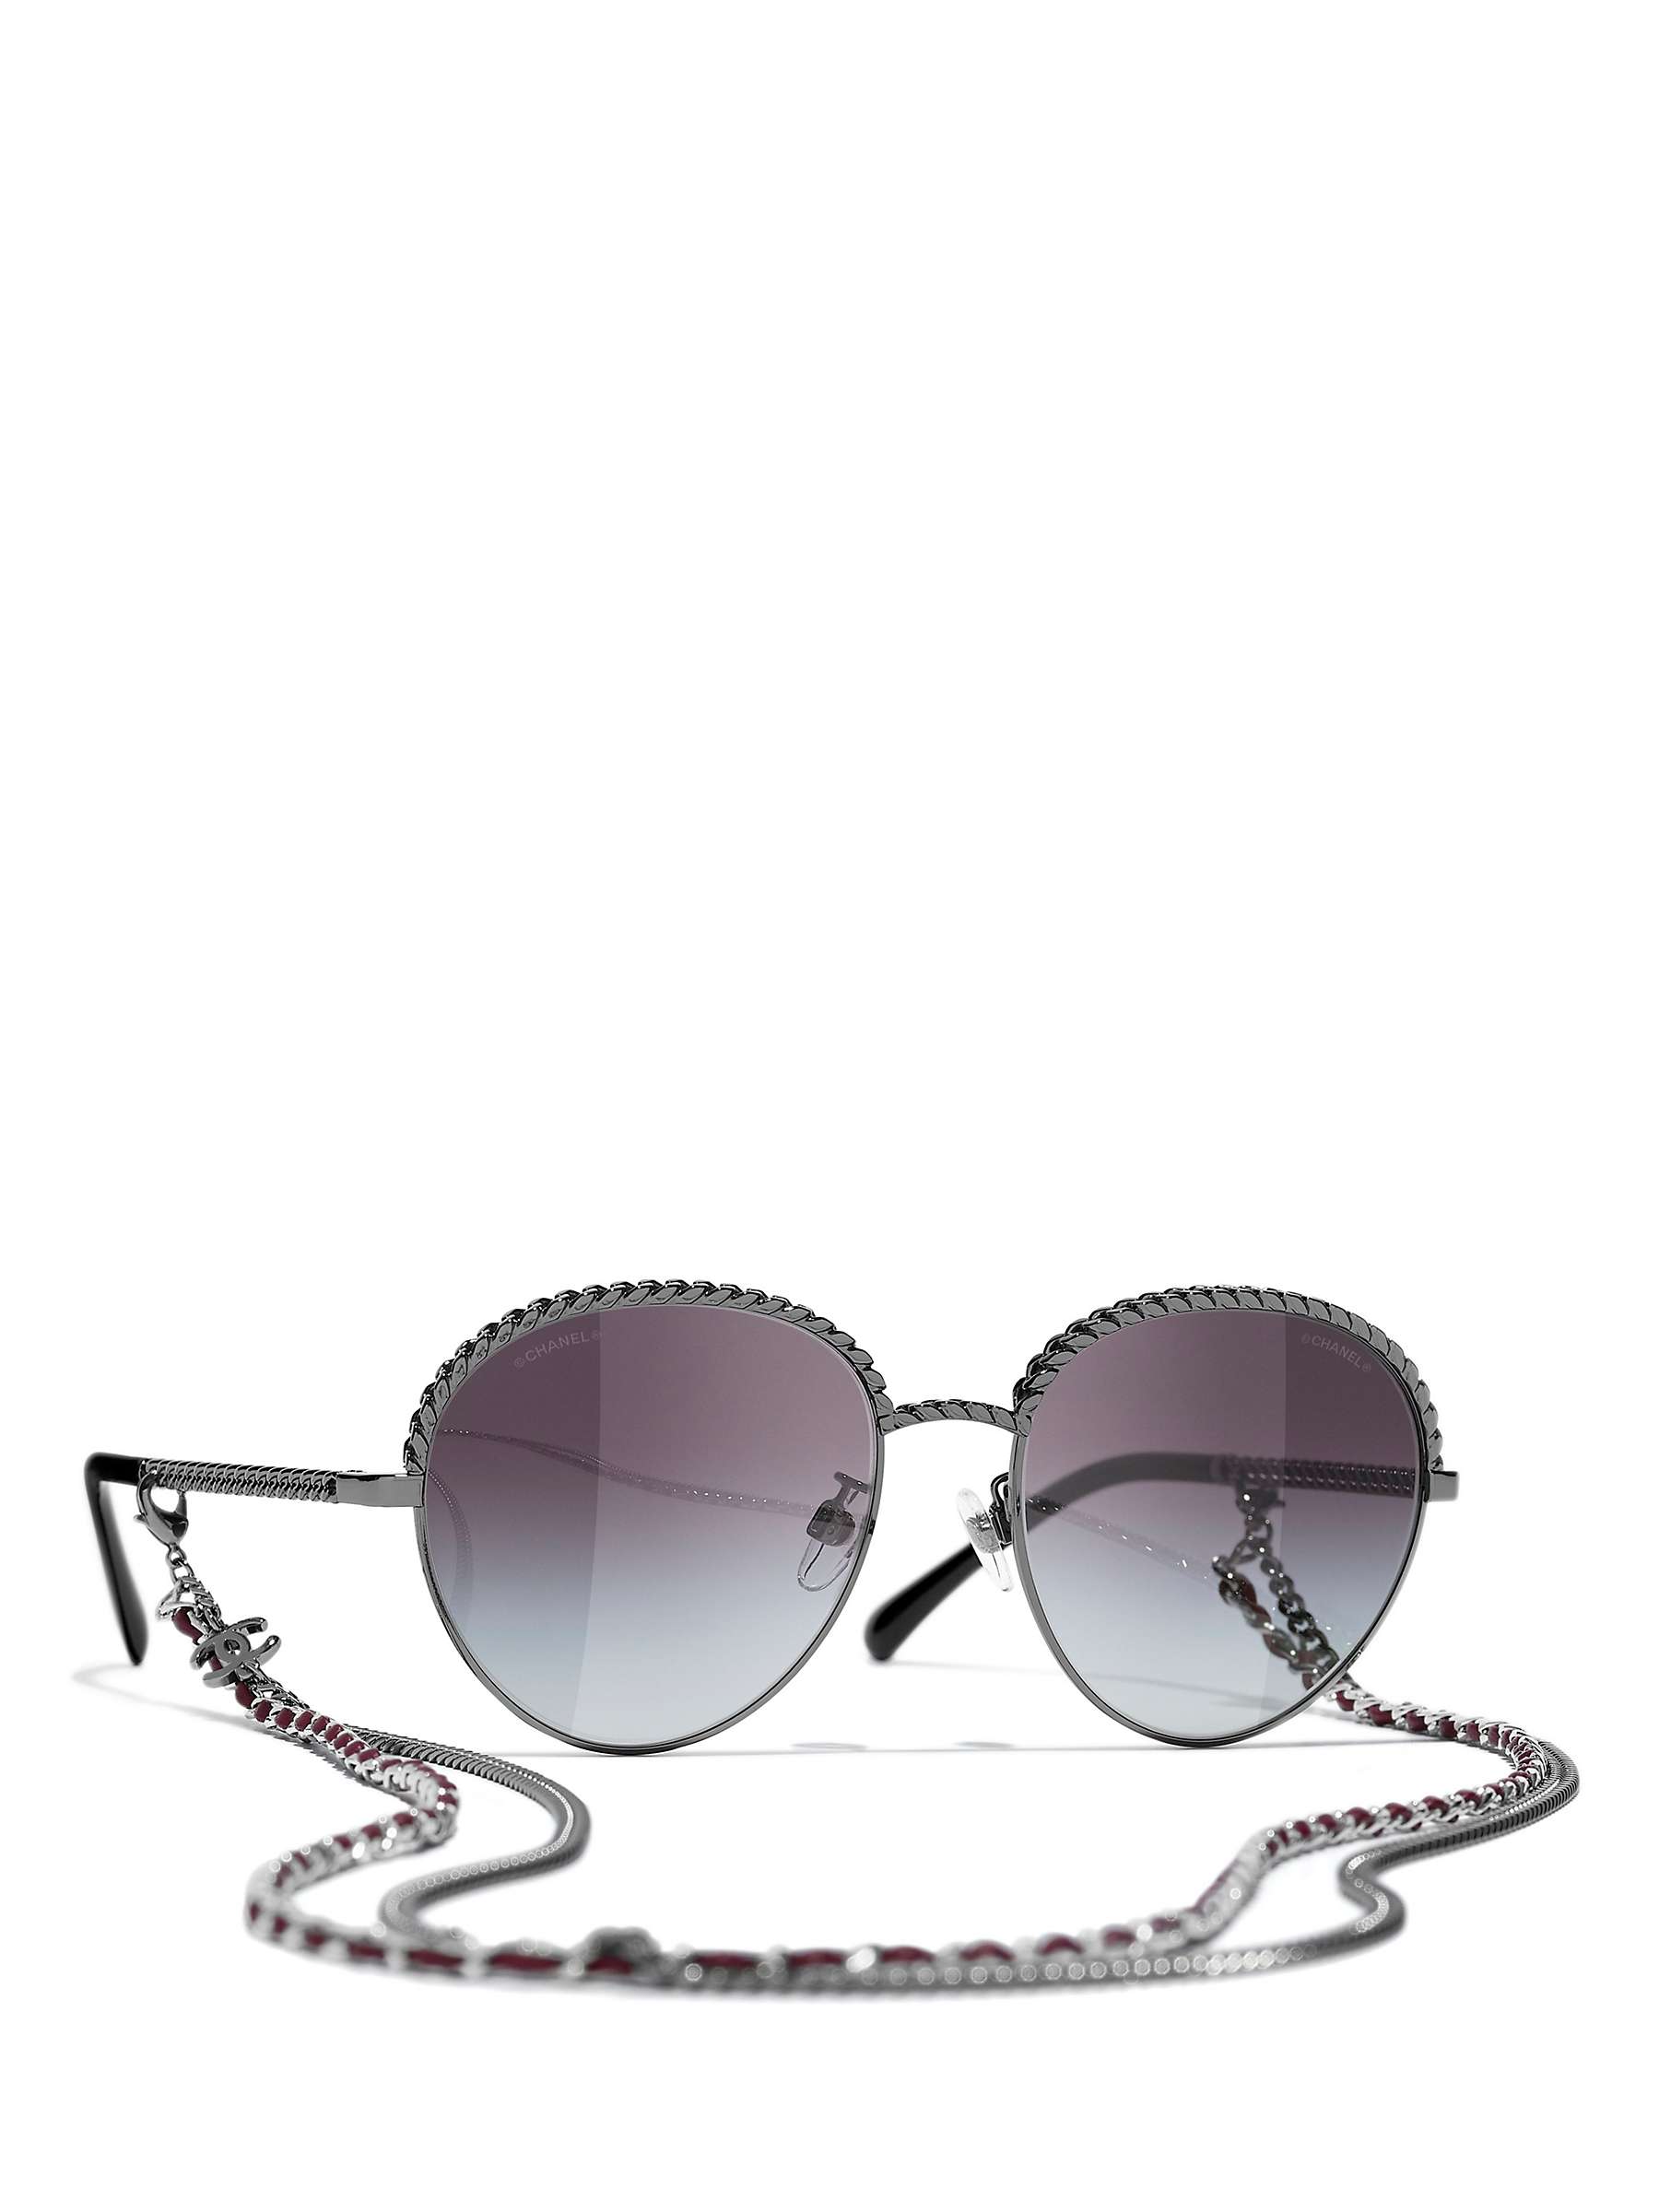 CHANEL Oval Sunglasses CH4242 Grey/Grey Gradient at John Lewis & Partners